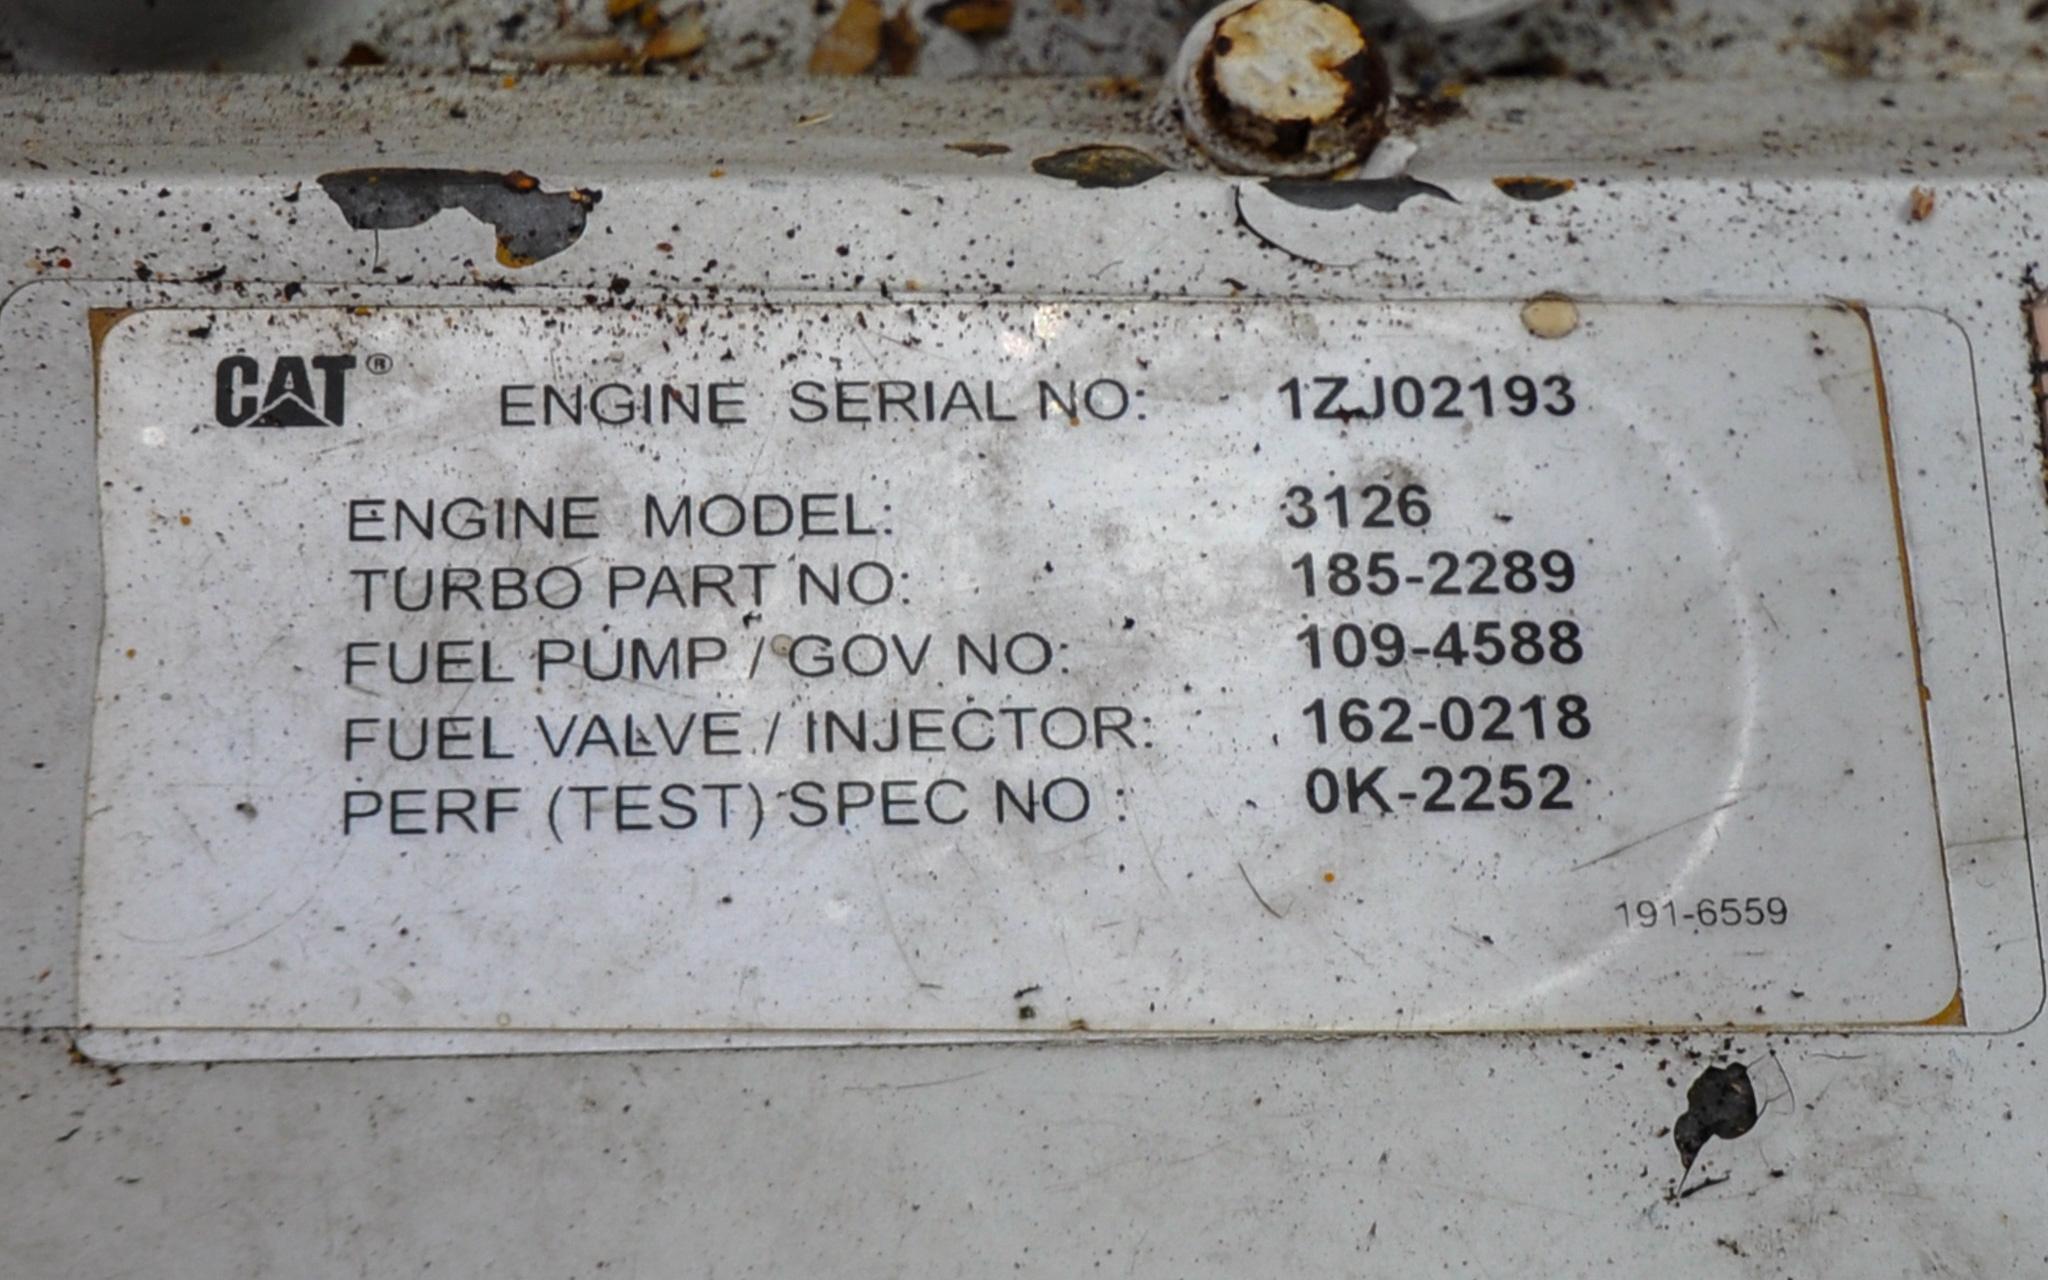 Wilbur 34 - Kingfisher - Engine Compartment - Engine Tags